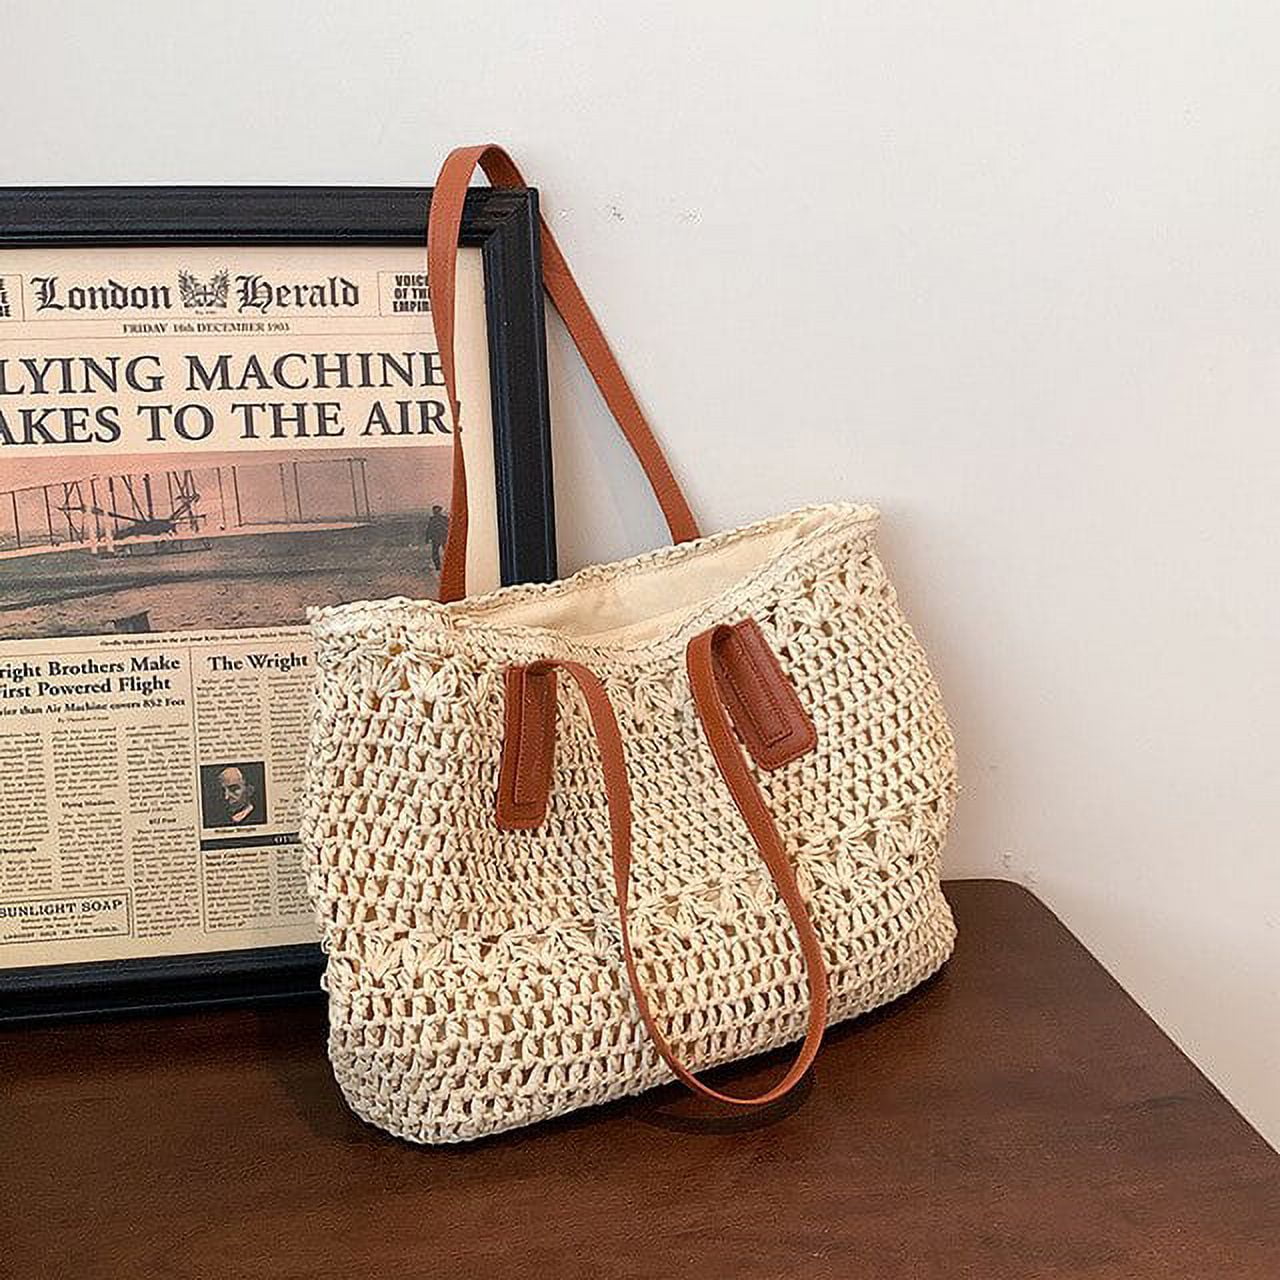 CoCopeaunt Summer Mini Straw Bag for Women New Weaving Scarf Womens  Shoulder Bags Beach Tote Trend Triangle Solid Female Handbags 